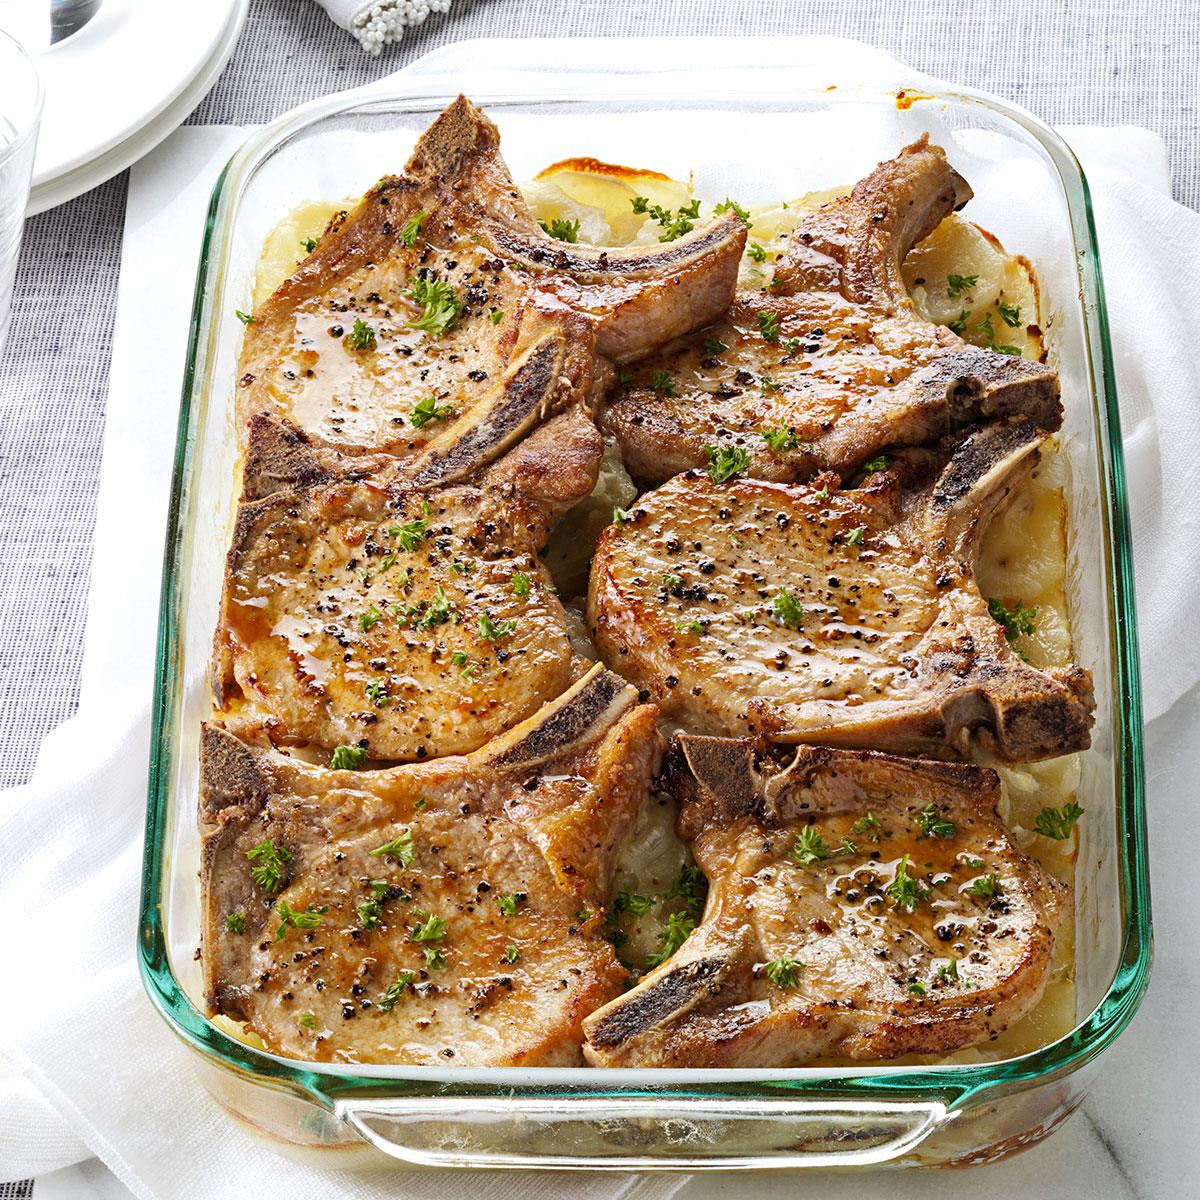 Healthy Side Dishes For Pork Chops
 Pork Chops with Scalloped Potatoes Recipe